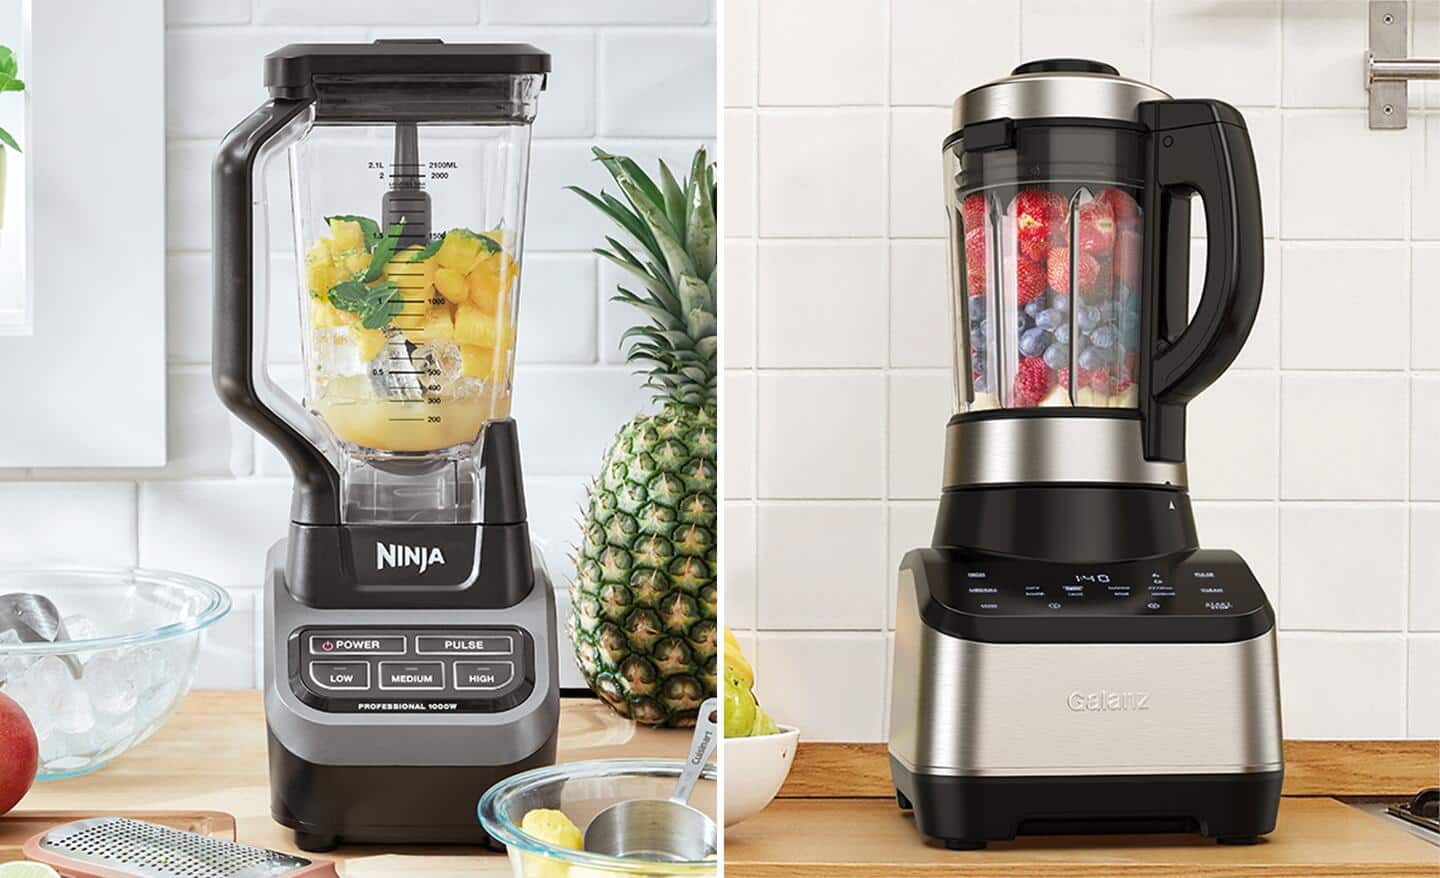 Blender vs. Food Processor: Which is Better? - The Home Depot